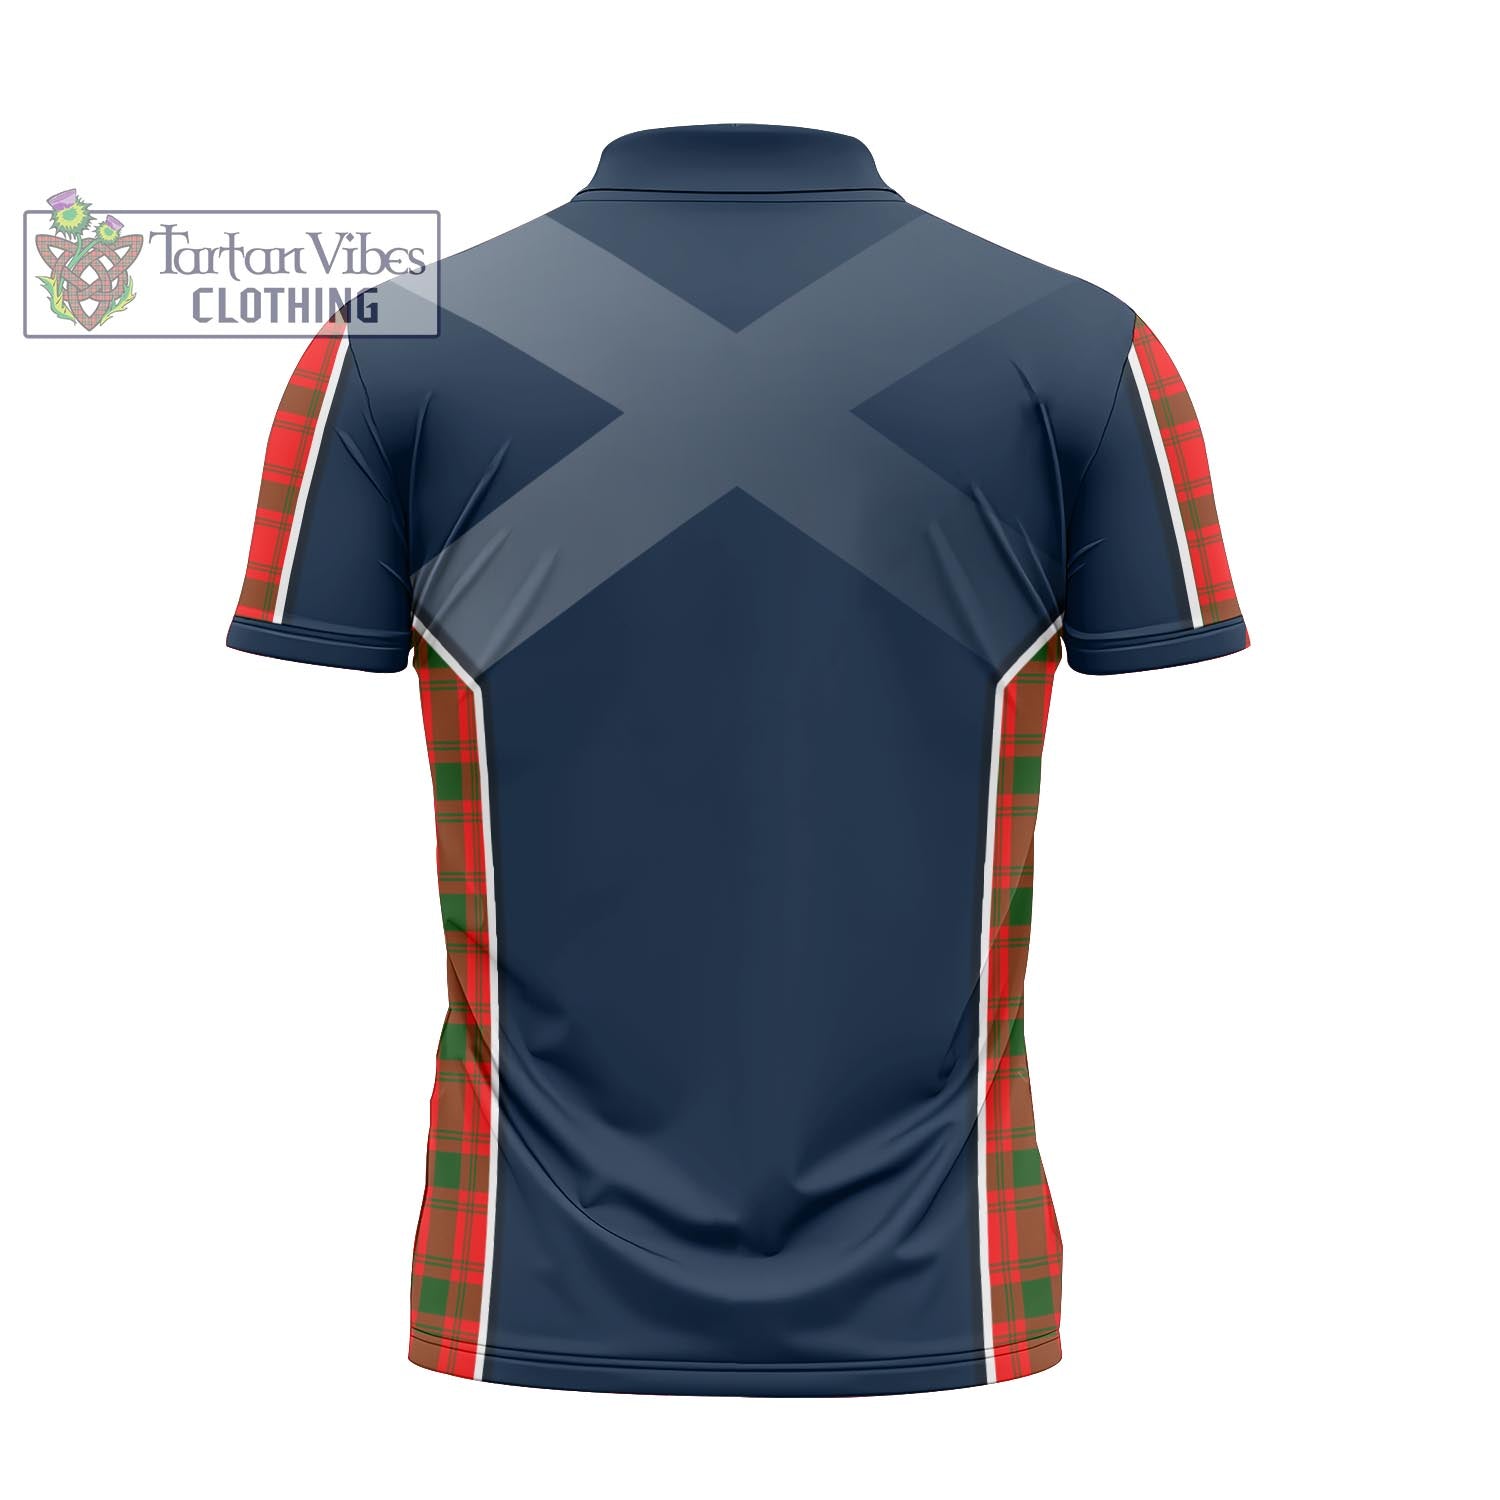 Tartan Vibes Clothing MacQuarrie Modern Tartan Zipper Polo Shirt with Family Crest and Scottish Thistle Vibes Sport Style